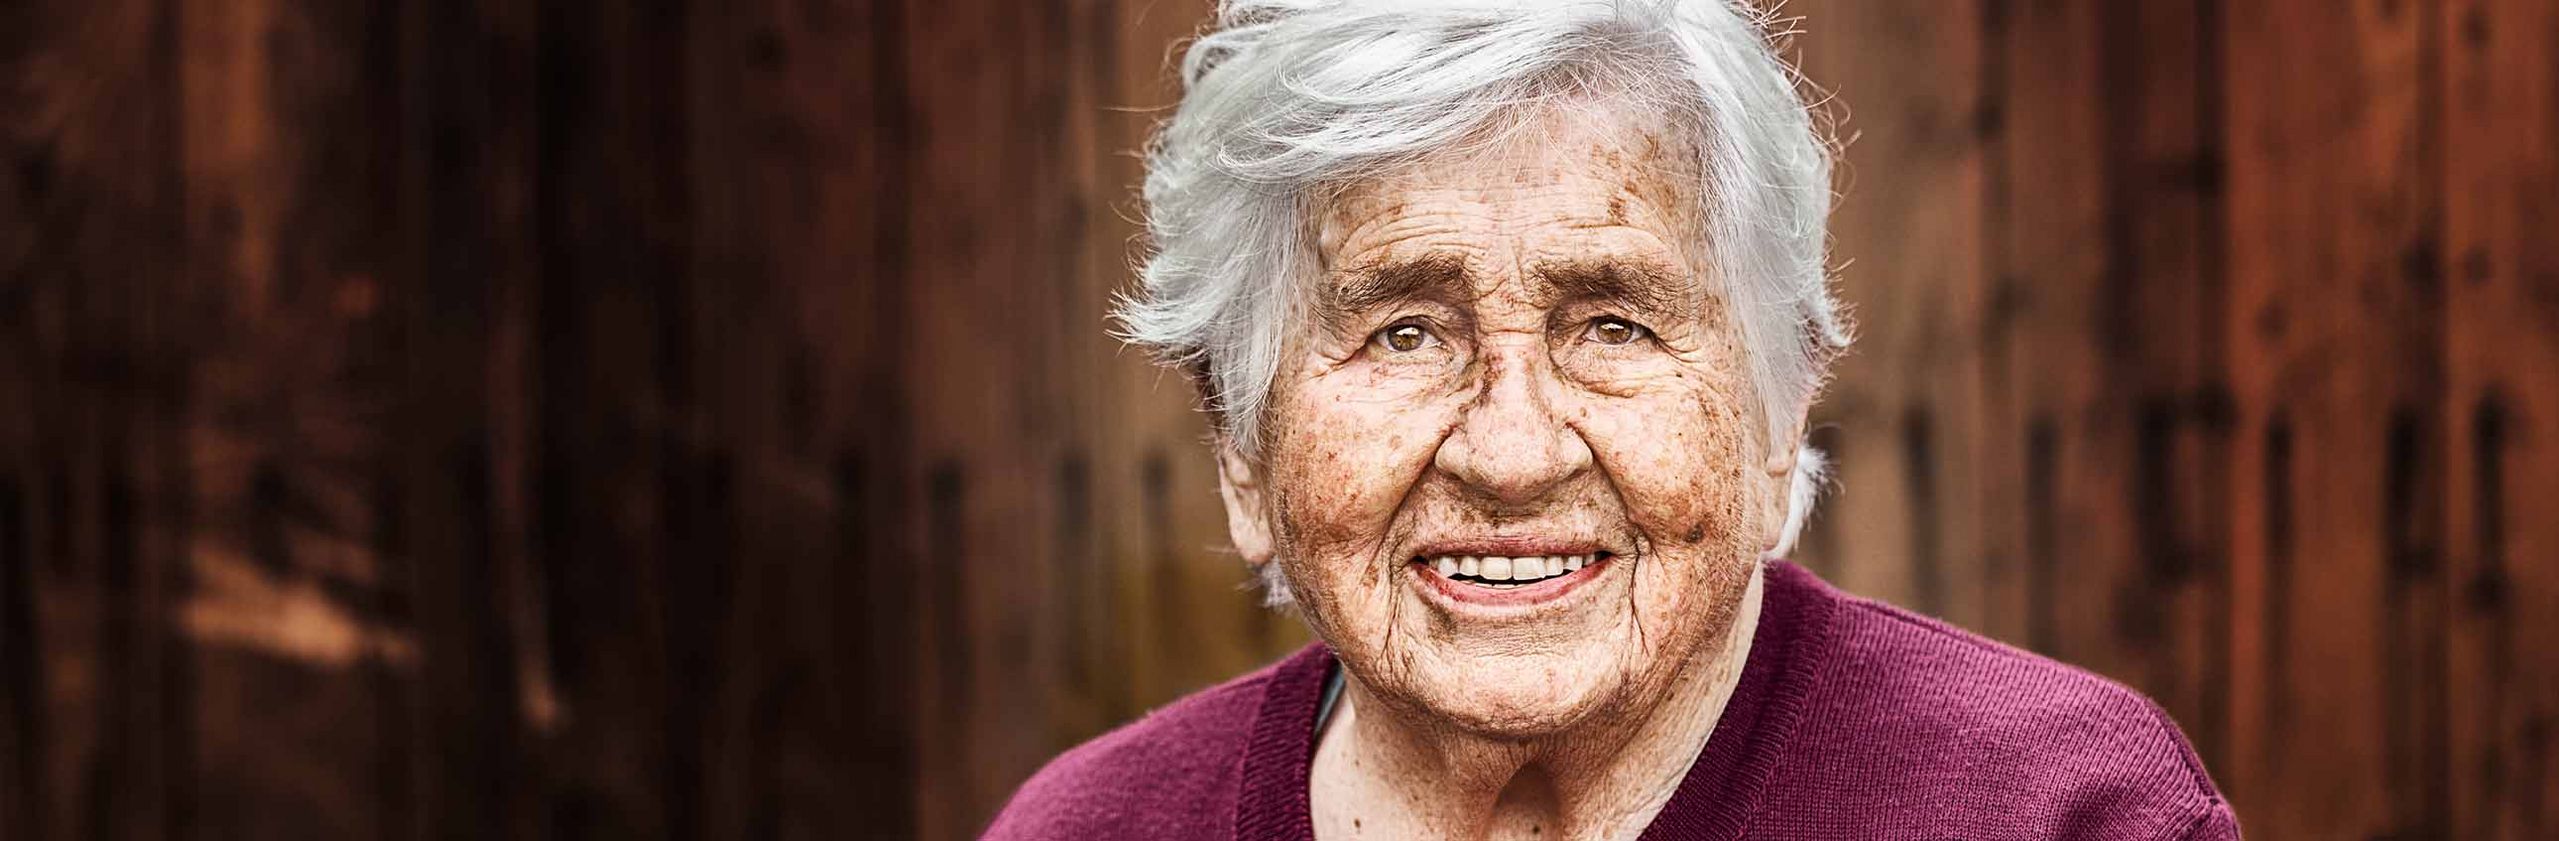 Aging with dignity and as much independence as possible